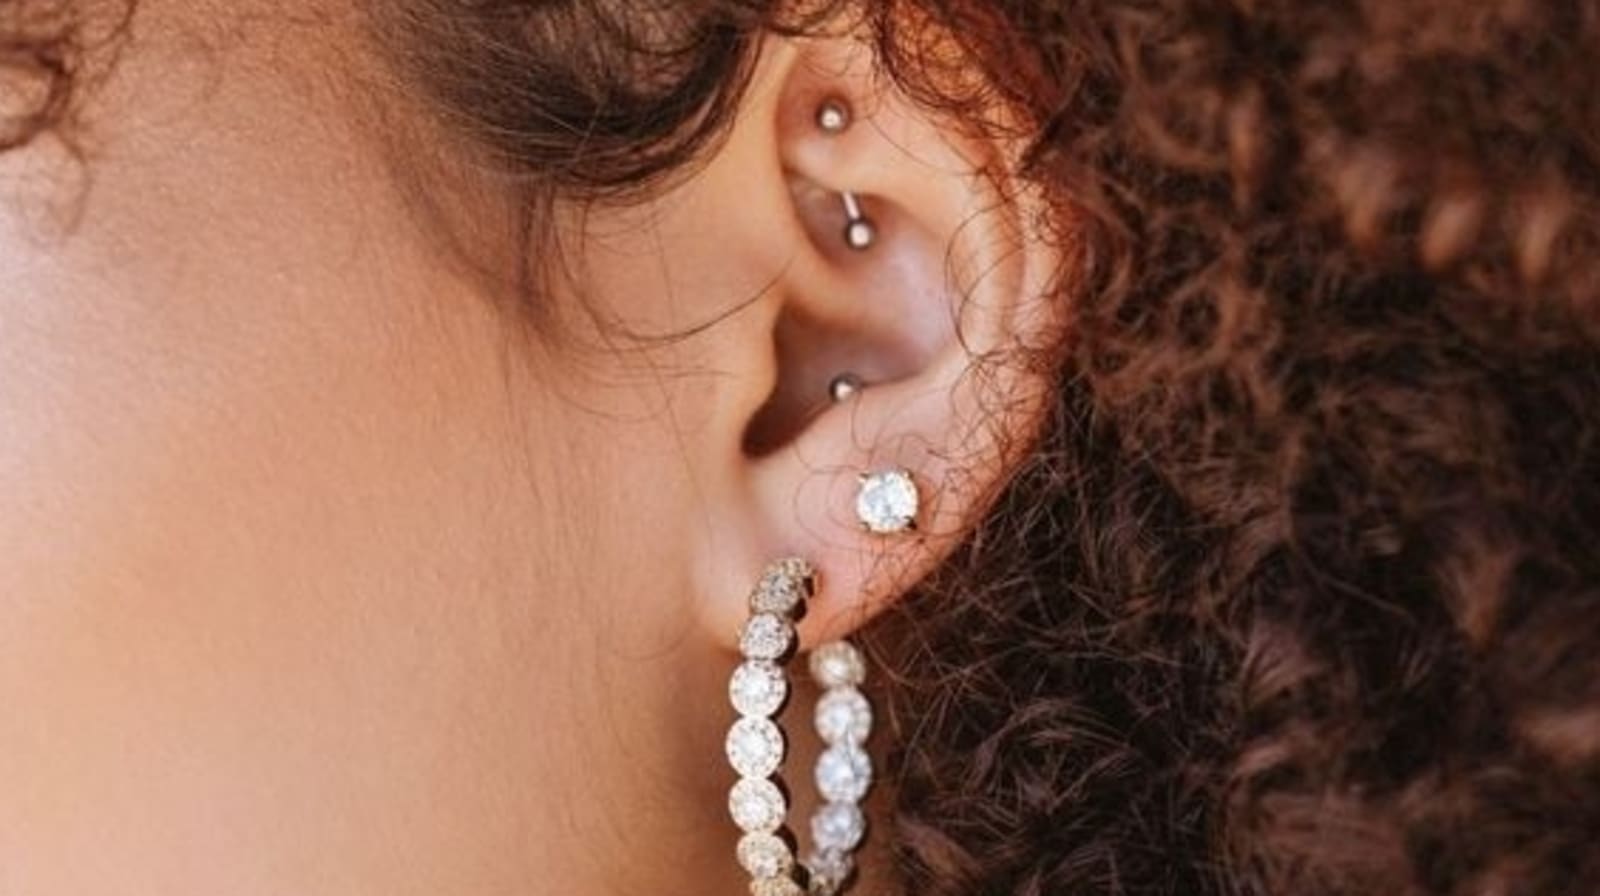 How to Clean Your Ear Piercing Properly to Prevent Infections